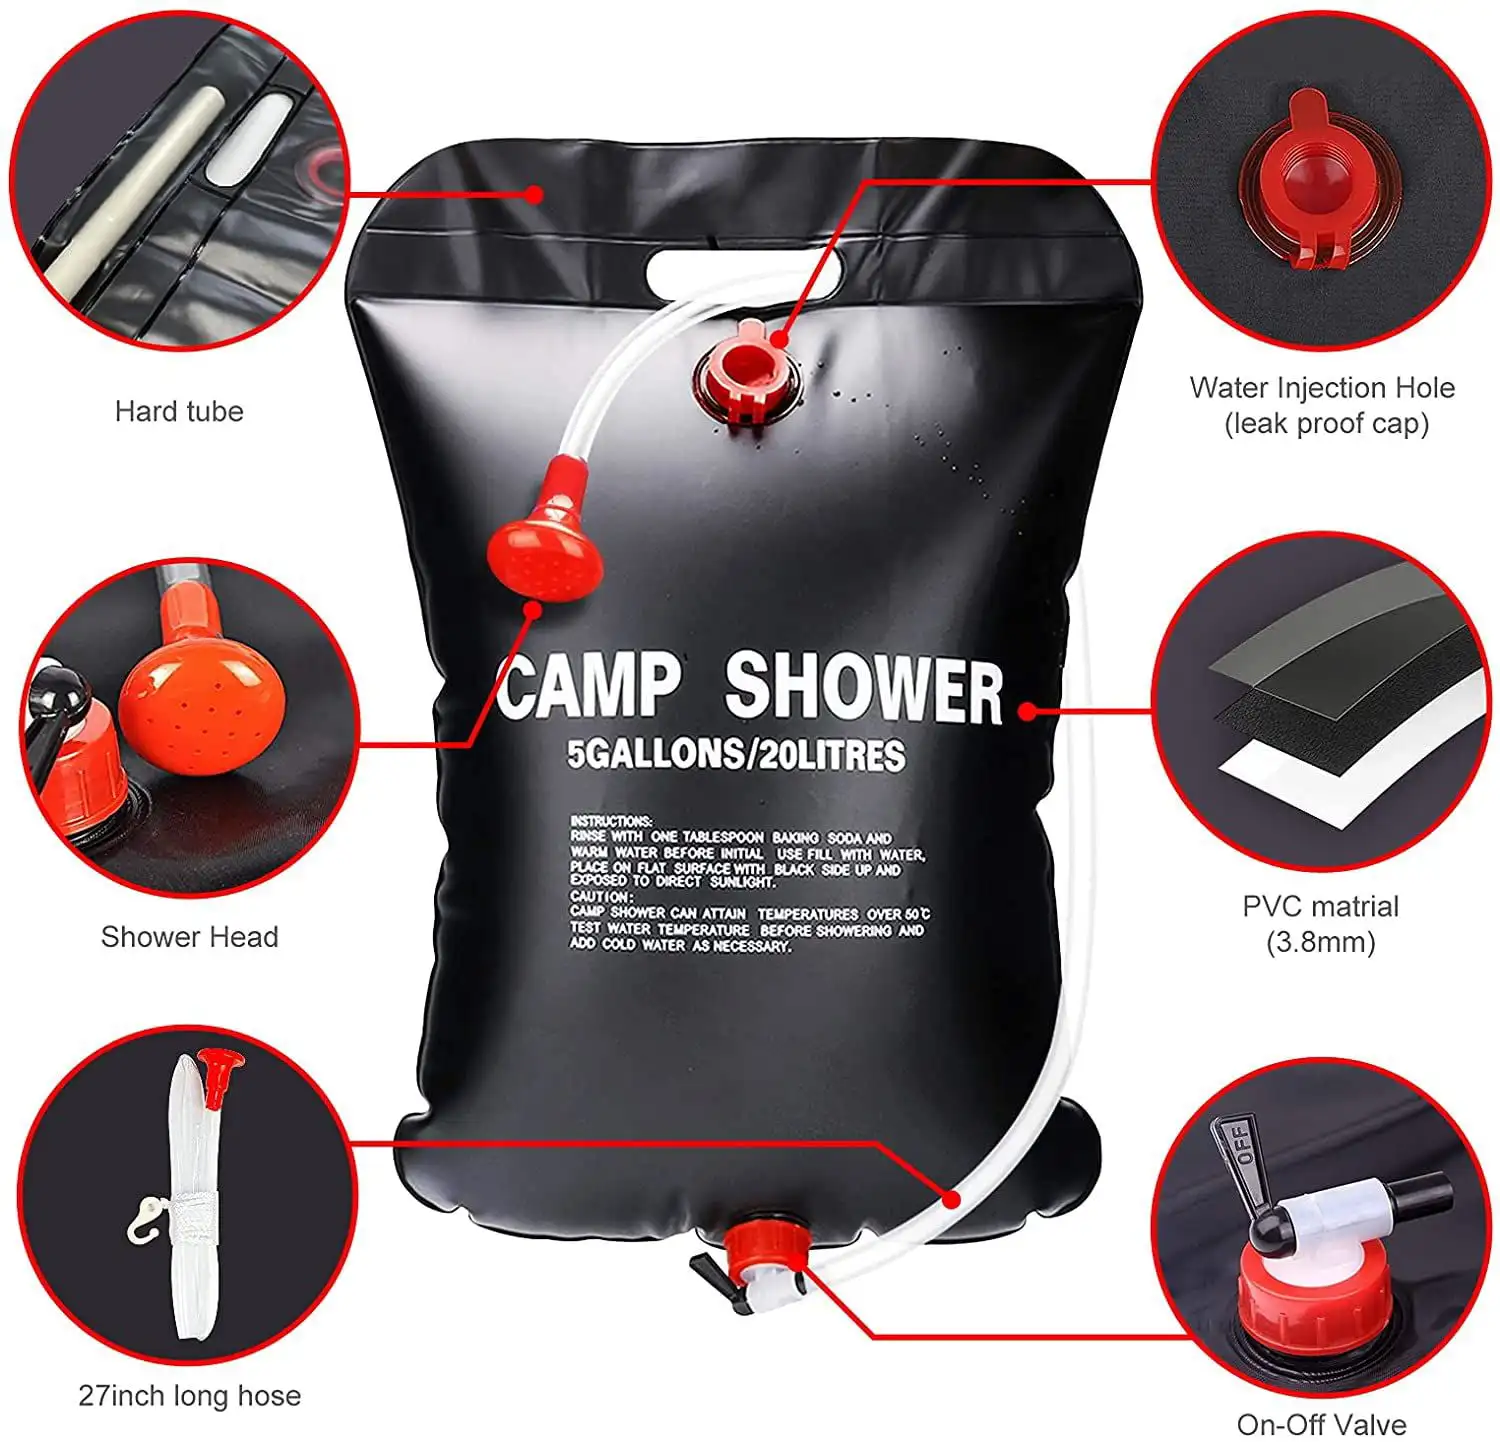 

Camping Portable Solar Shower Bag, 5 Gallons/20L, with On/Off Shower , Camping, Beach Swimming, Outdoor Traveling, Camping Acce